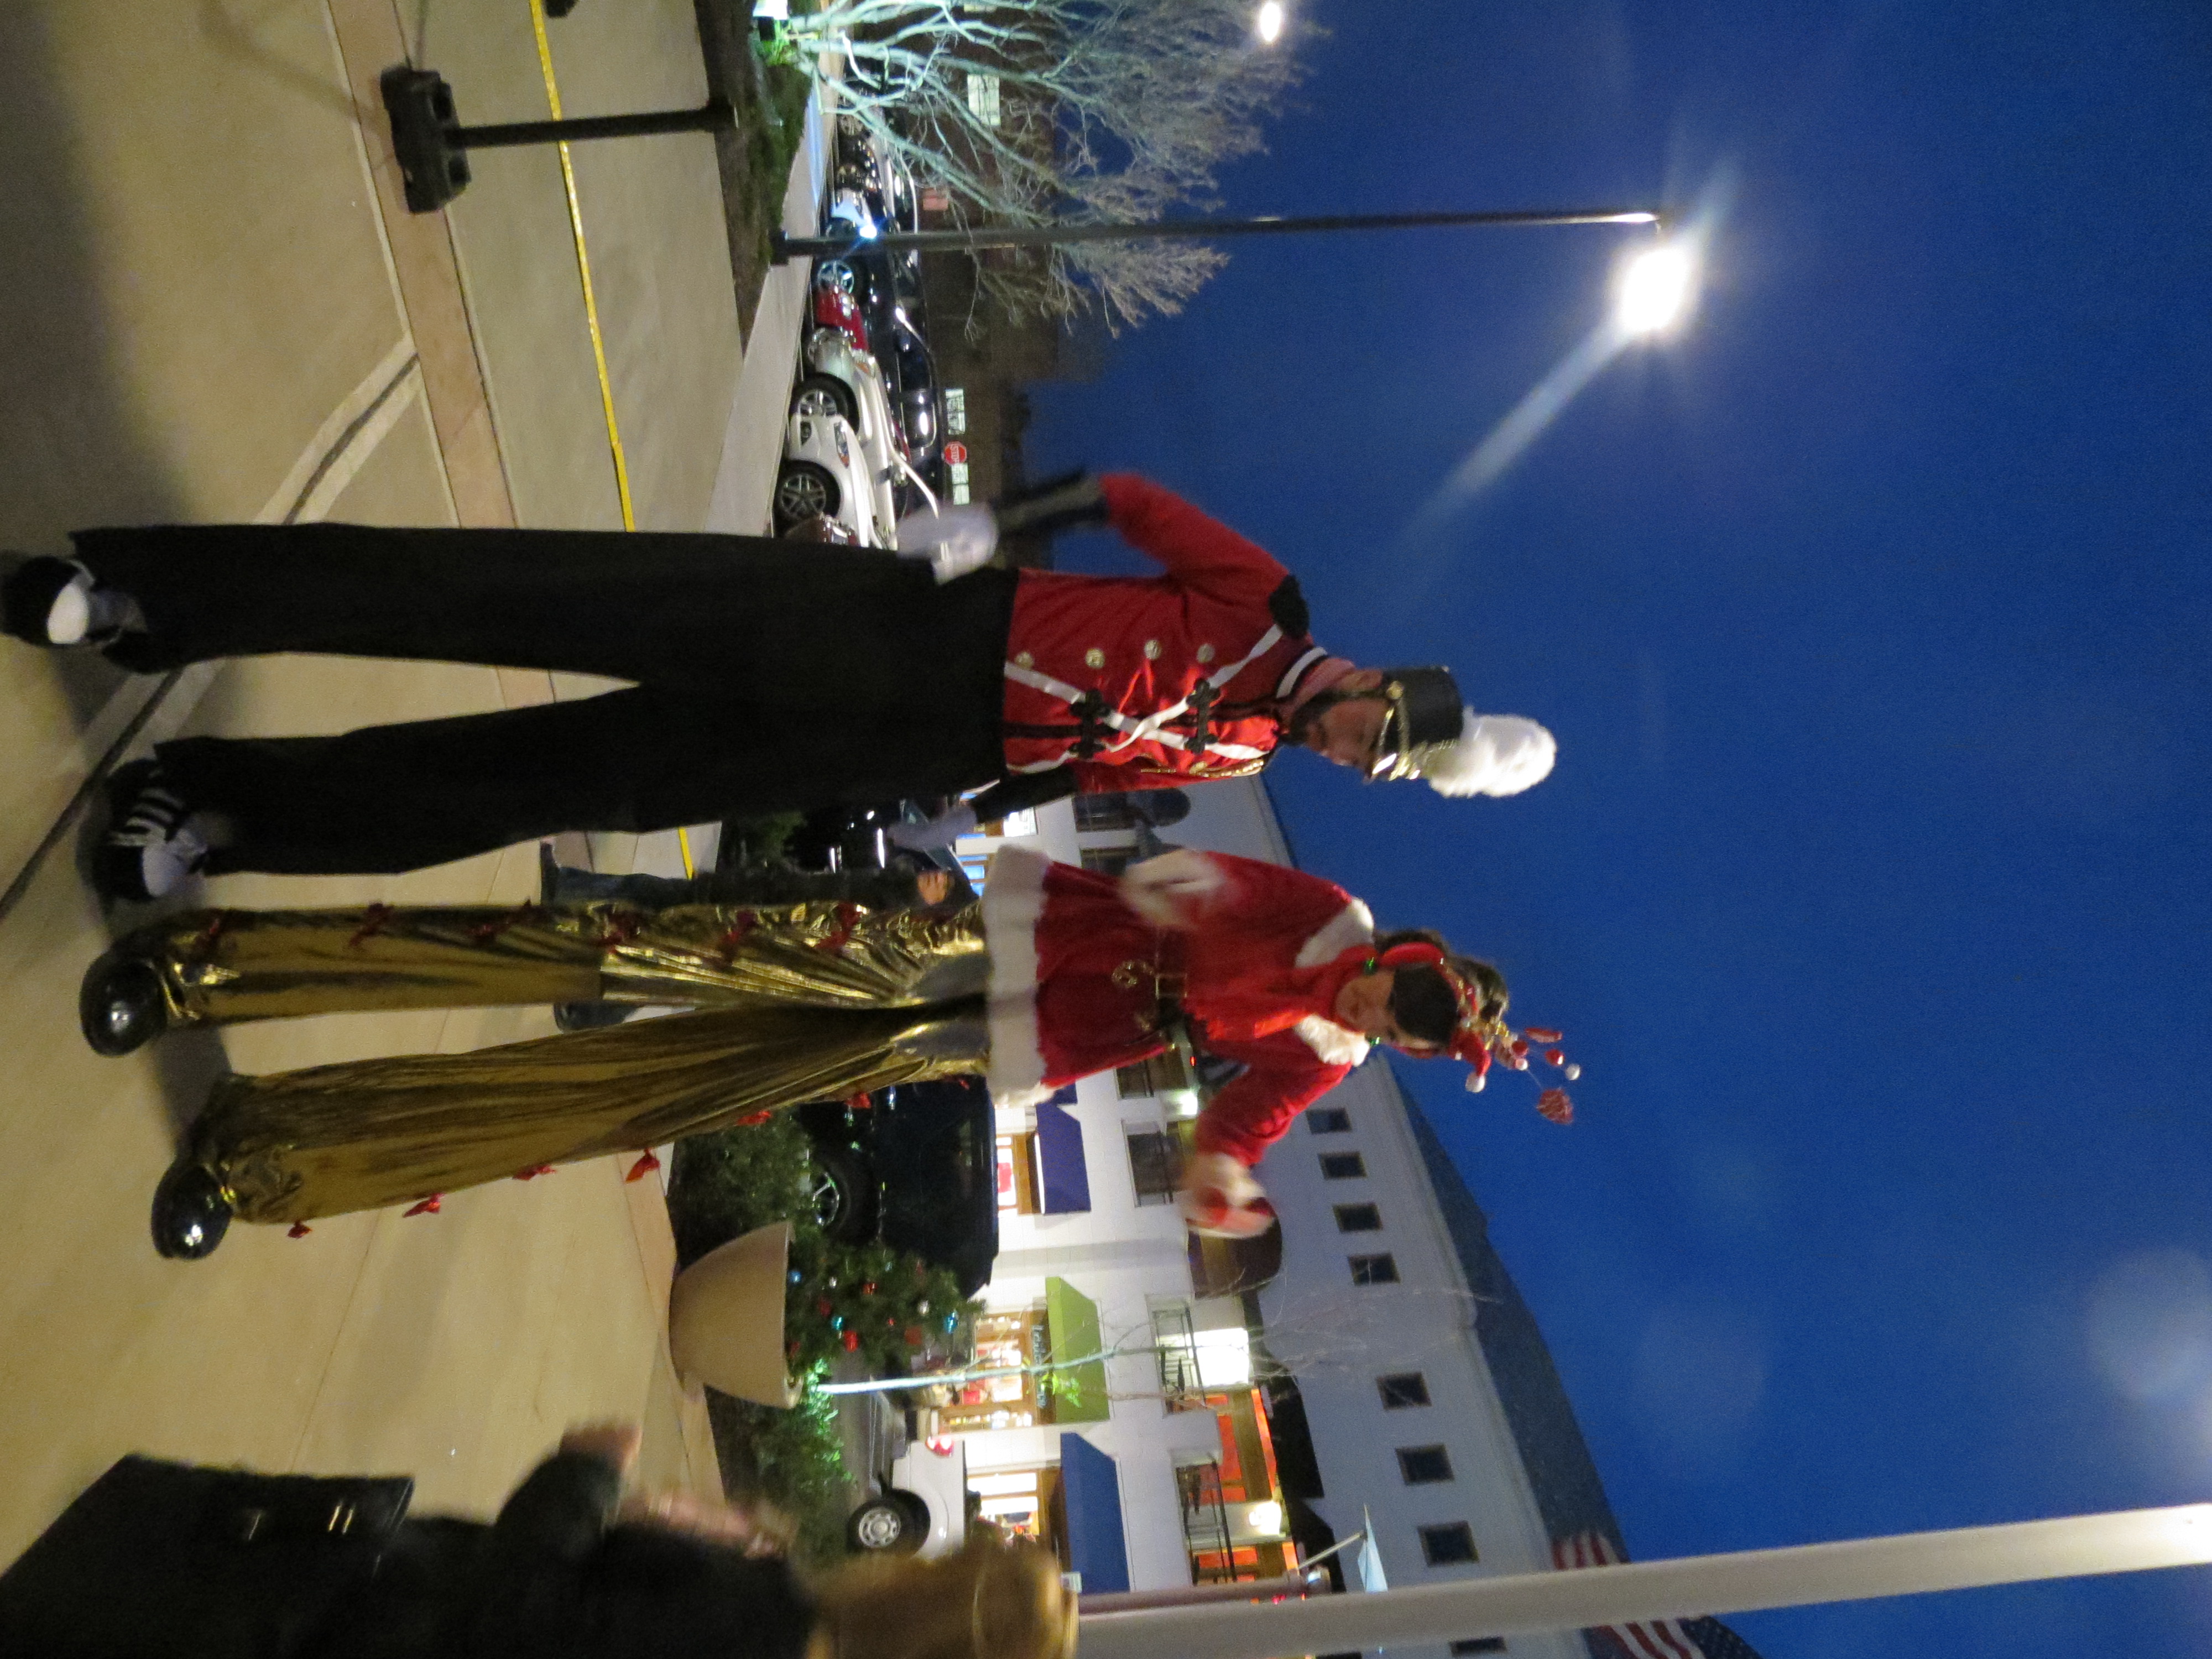 Two "elves" on stilts entertained the crowd for hours.